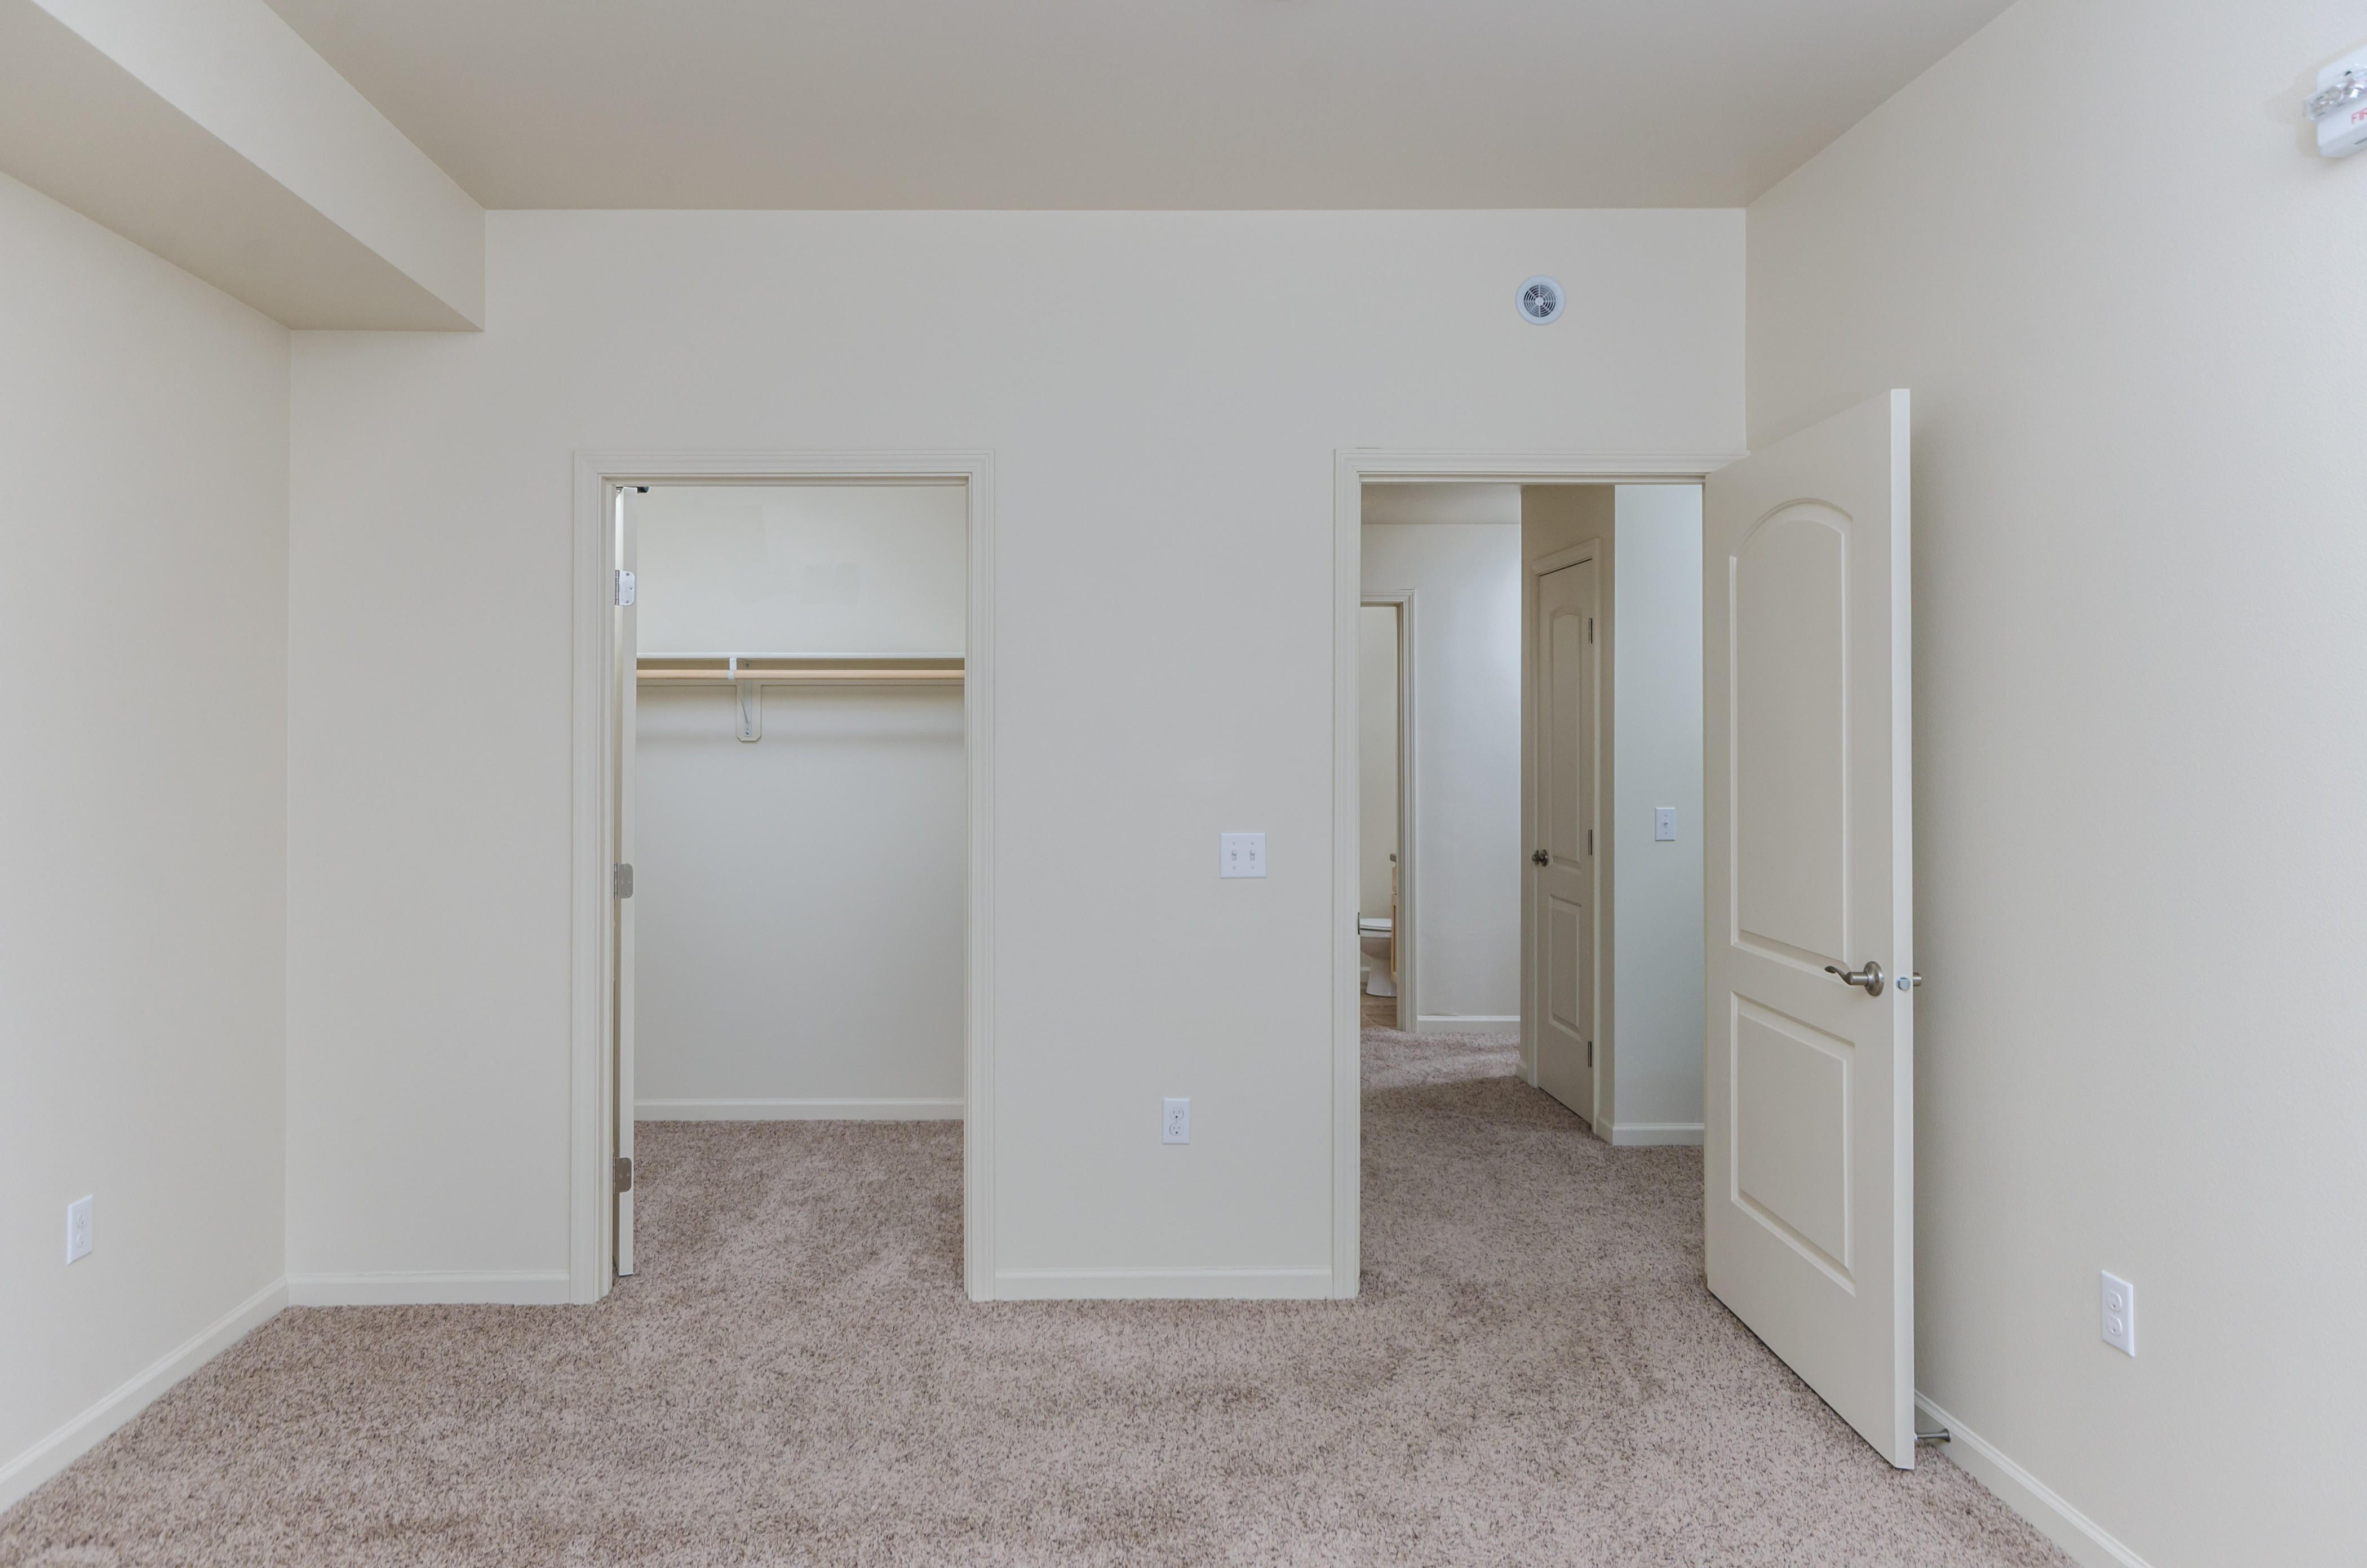 2BR Bedroom Walk-in Closet in The Residences at Northwood